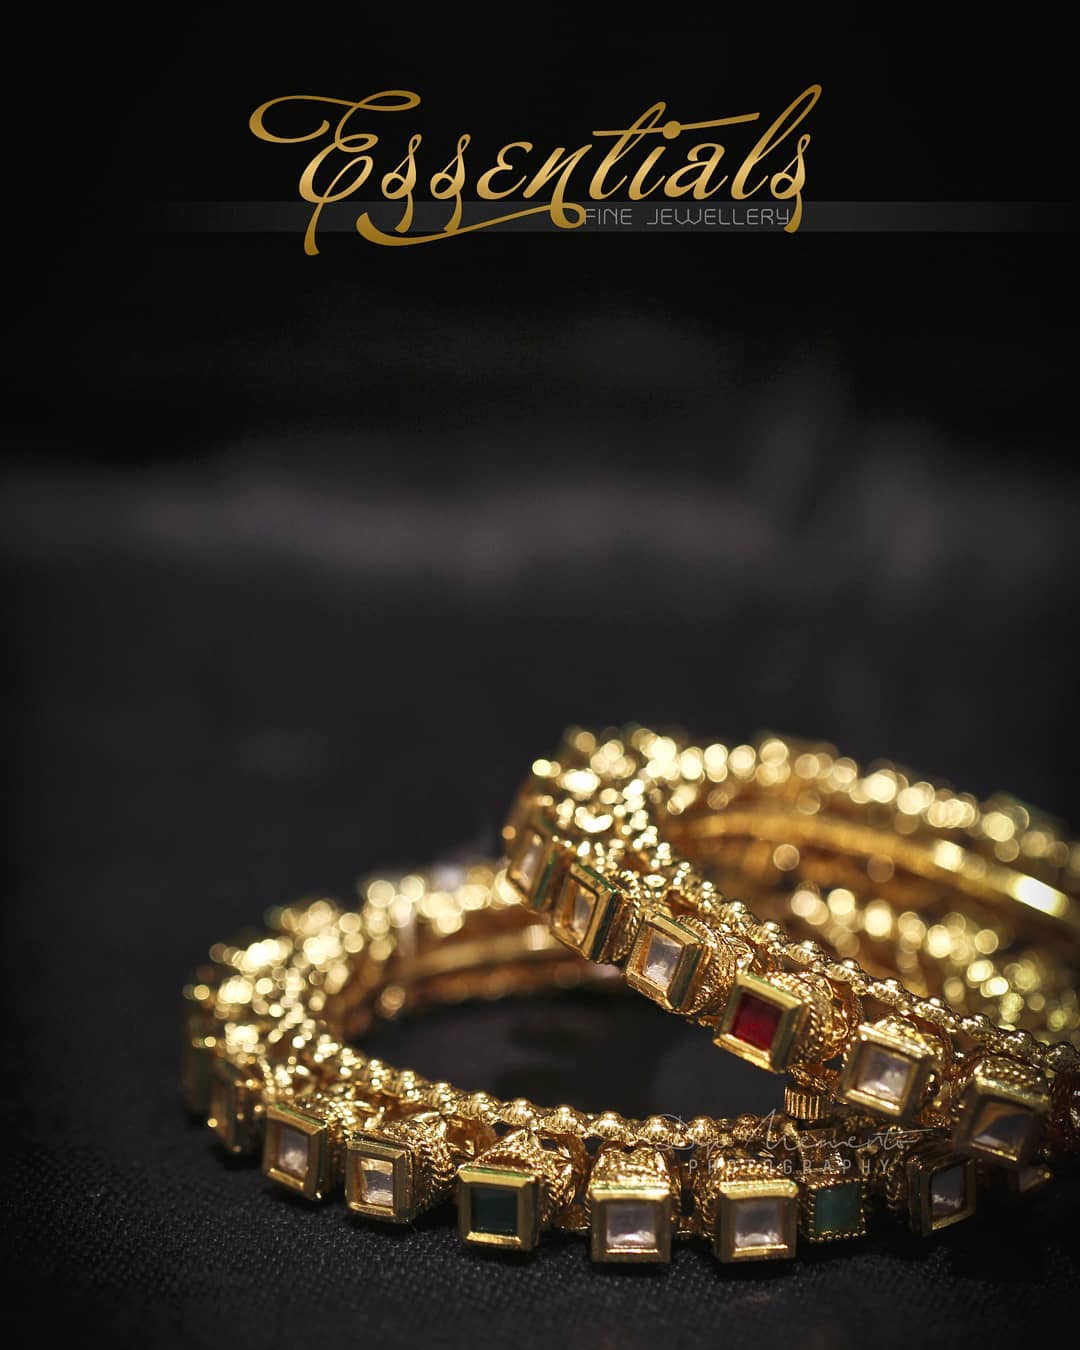 Essentials.. Delicately adorn your wrists.
______________________________________
@dip_memento_photography
@memento_photography

Contact  for jewelery & product shoot.. Call on  9924227745 or whatsapp 
https://wa.me/919924227745
https://mementophotography.xyz
______________________________________

#gold #jewelry #silverjewelry #silverjewellery #photography #ahmedabad #vadodara #rajkot #silverline#finejewelry #luxury #luxurylife #luxuryjewelry #jewellery #jewellerydesign #jewellerylover #jewelleryaddict #precious #indian #indianfashion #indiaphotoproject #indianjewelry #indiantourism #gemstonejewelry #gemstone #vintage #diamonds #everydayluxury